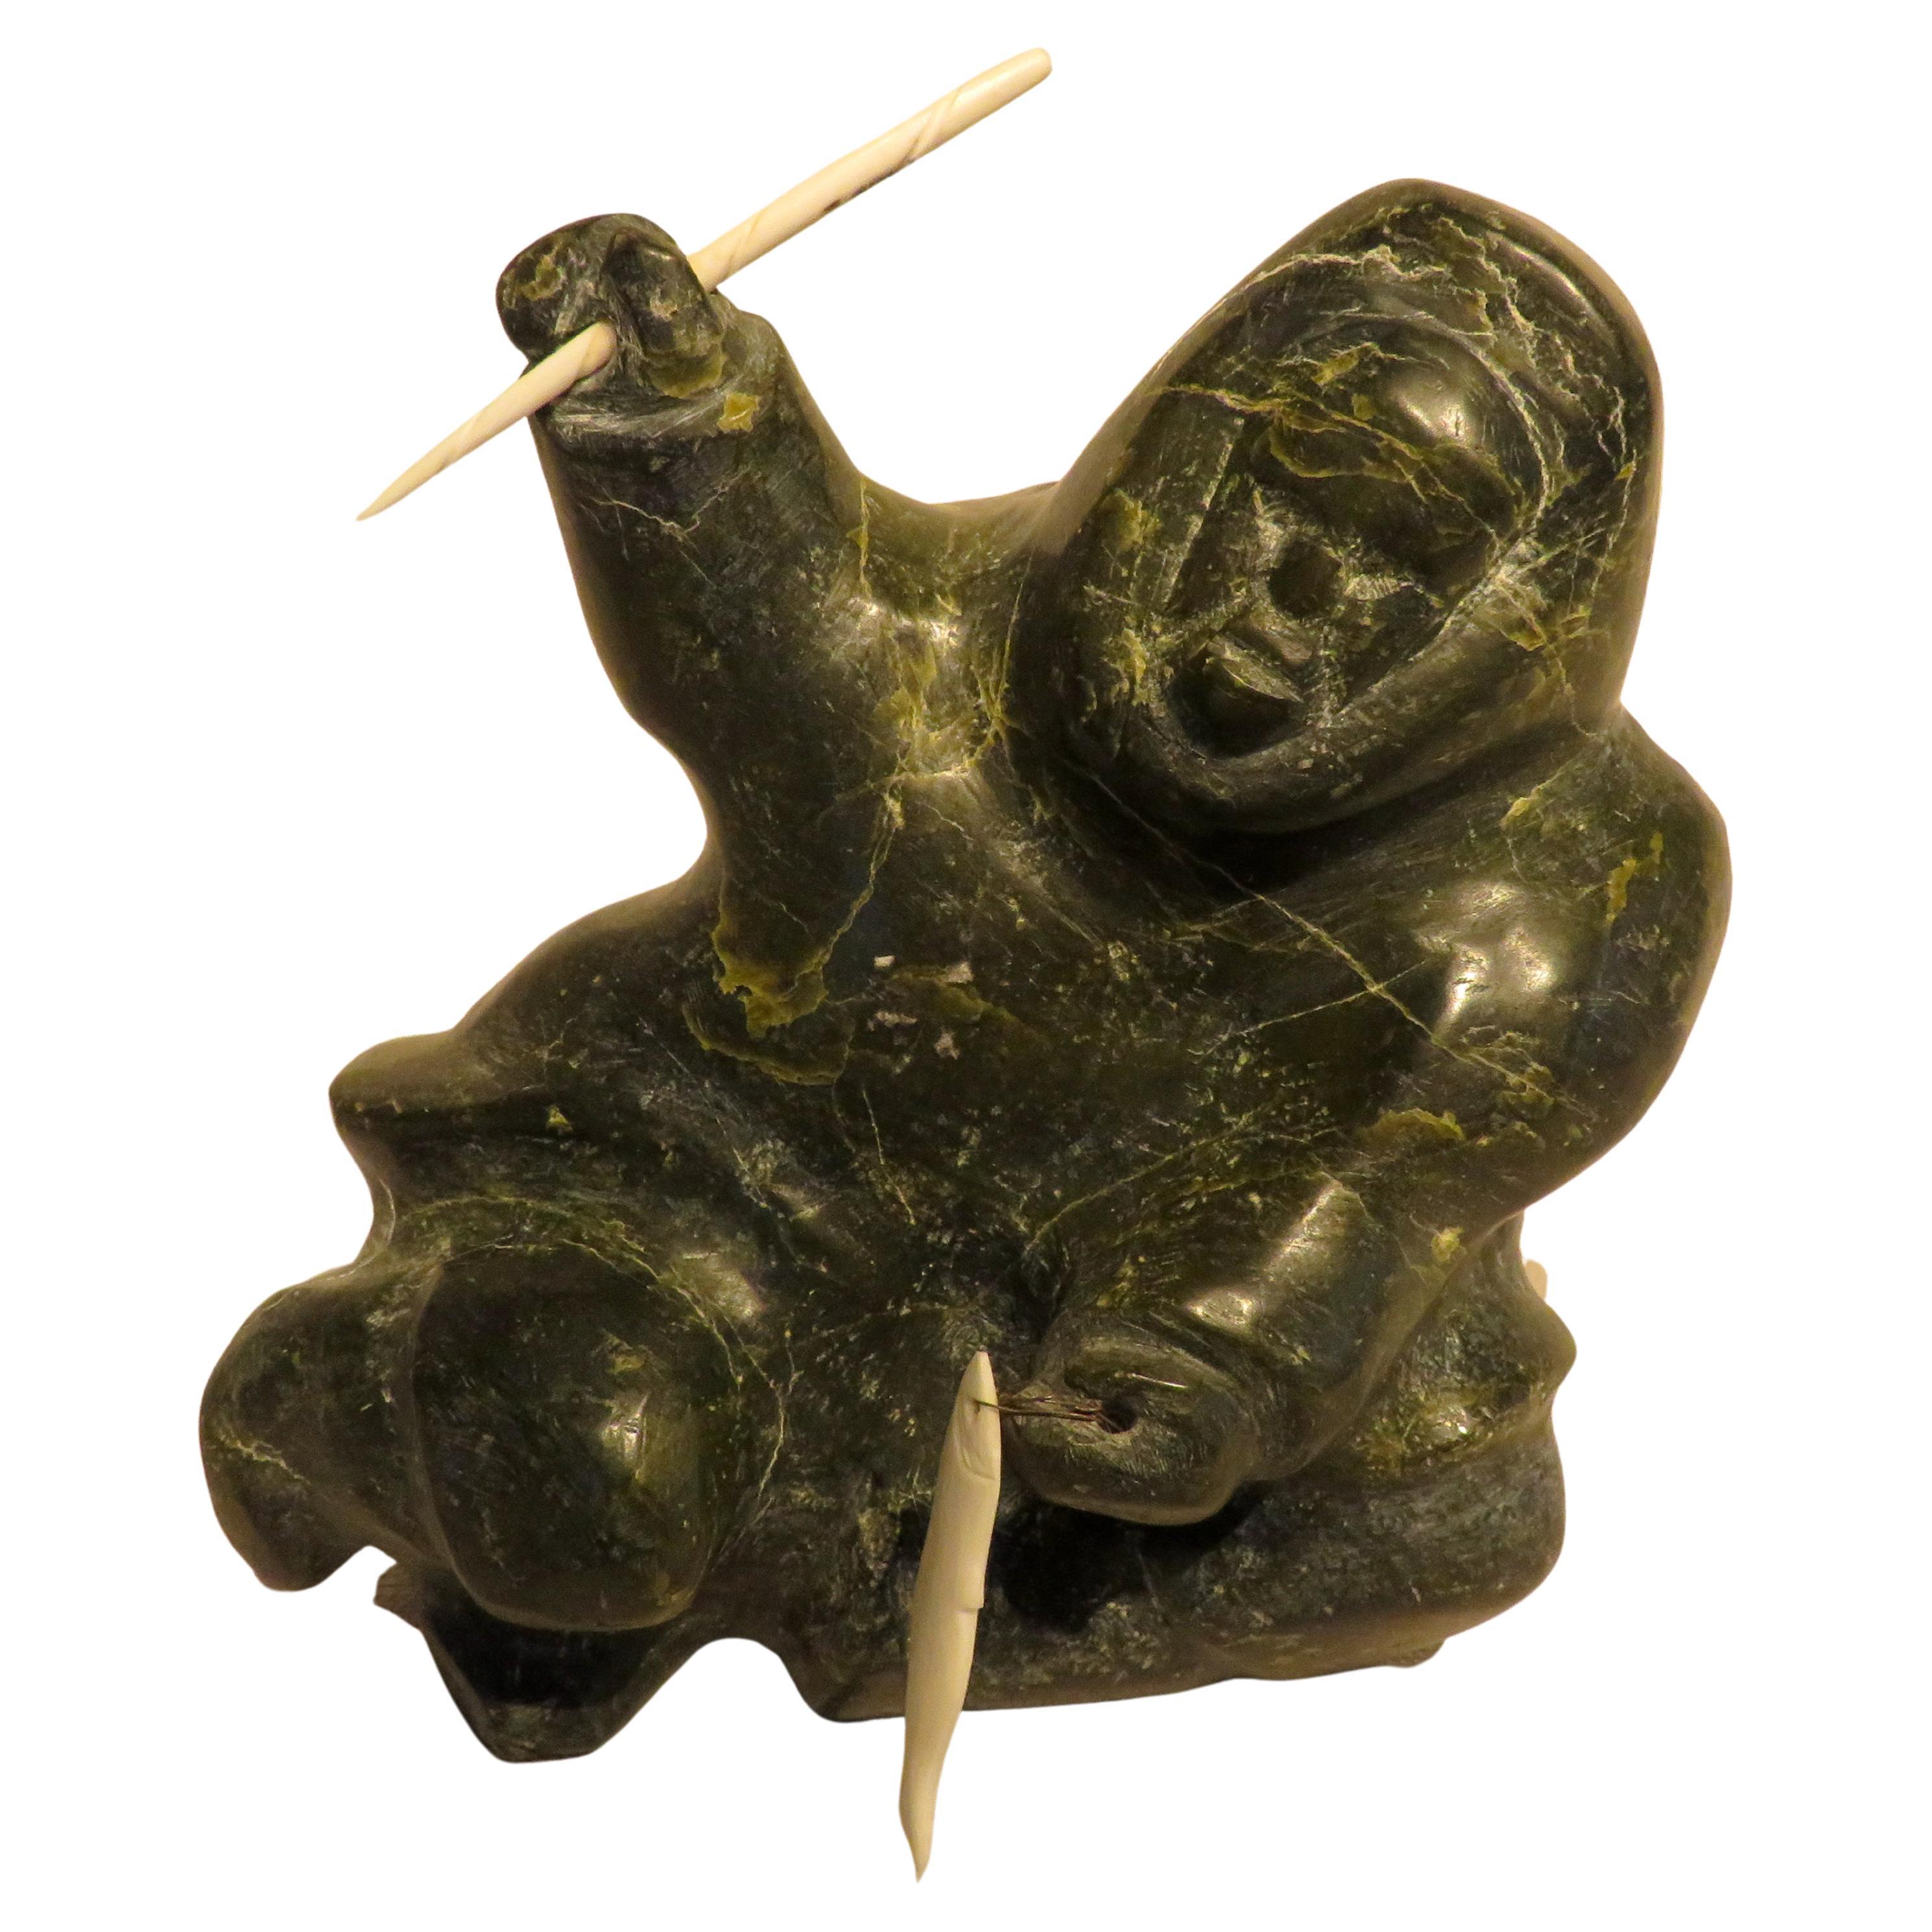 Carved Soapstone Sculpture of a Seated Inuit Holding a Bone Narwhal Tusk & Fish